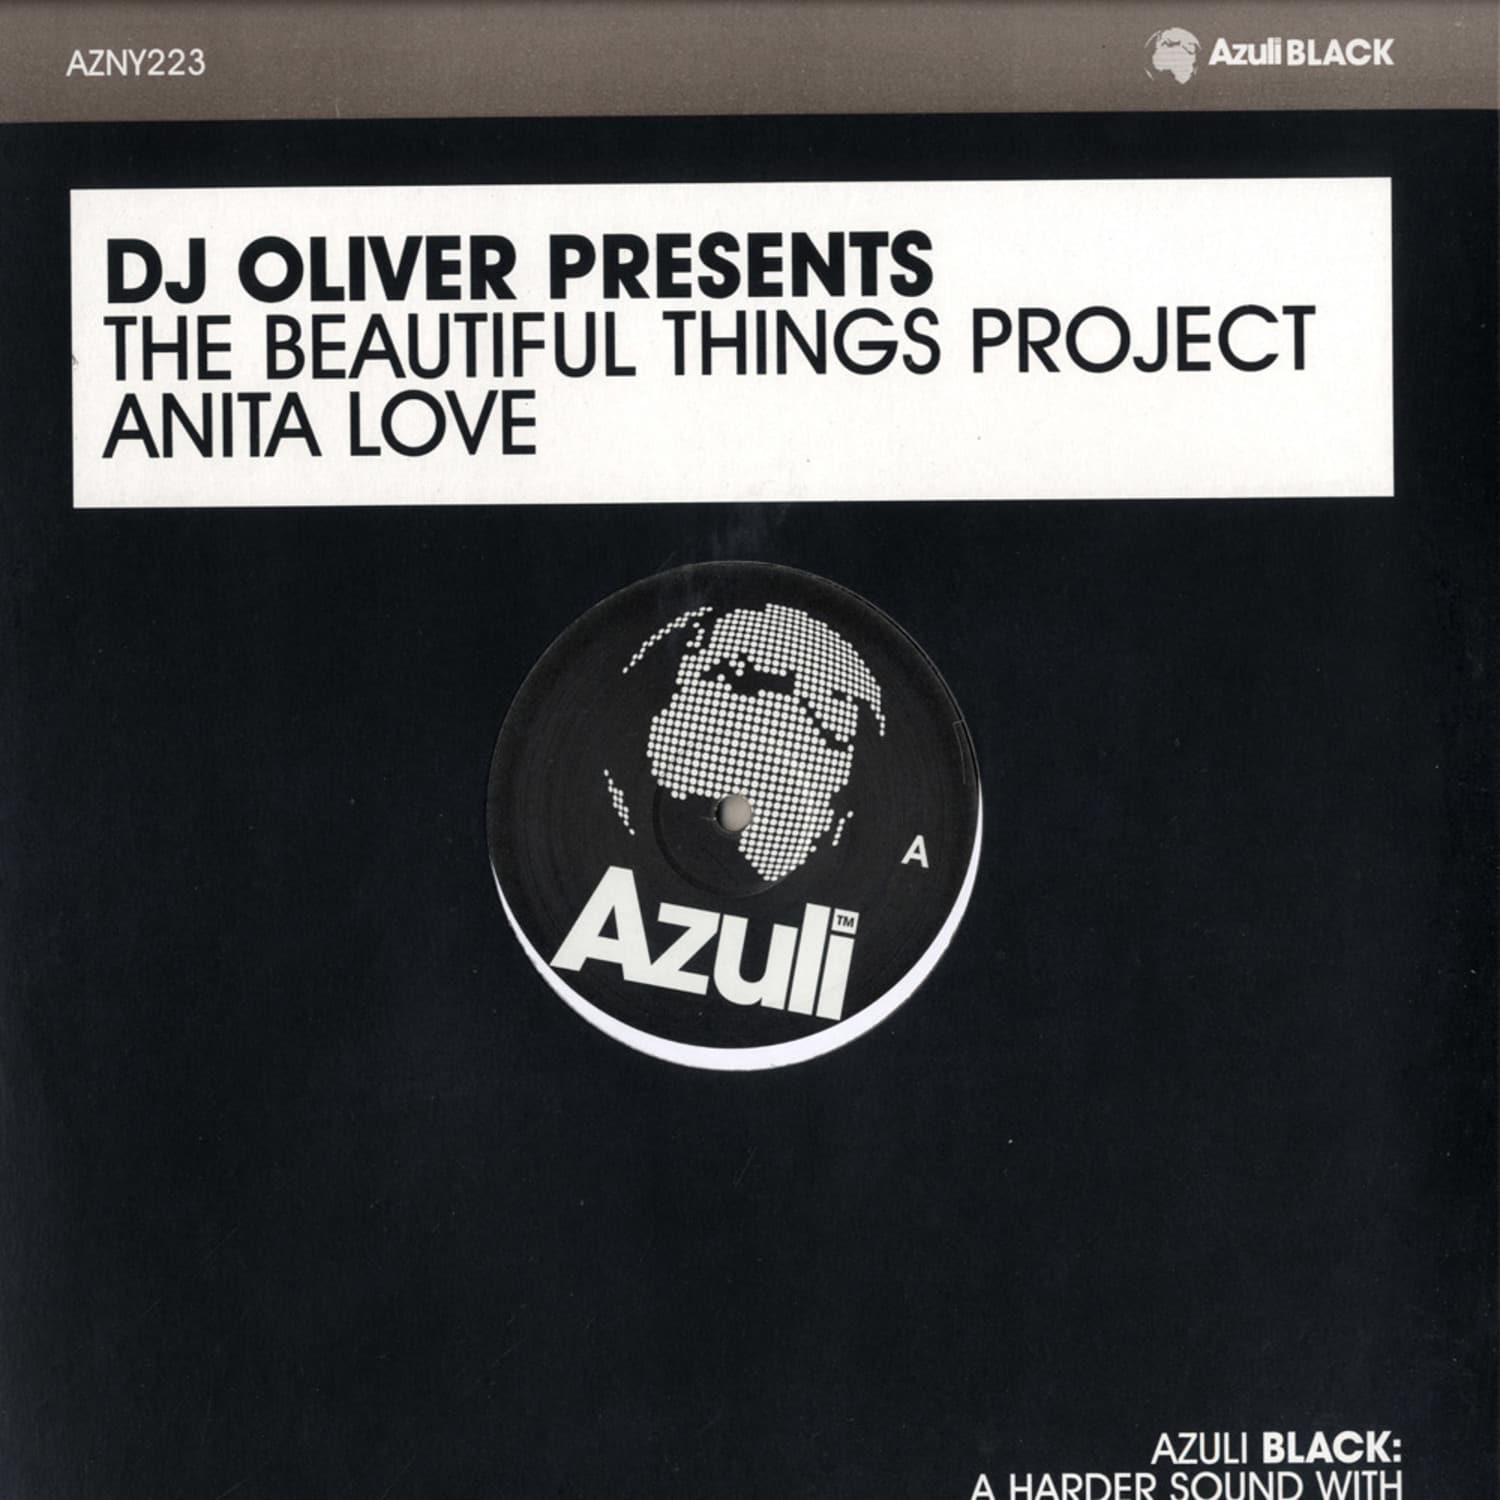 DJ Oliver - THE BEAUTIFUL THINGS PROJECT ANITA LOVE